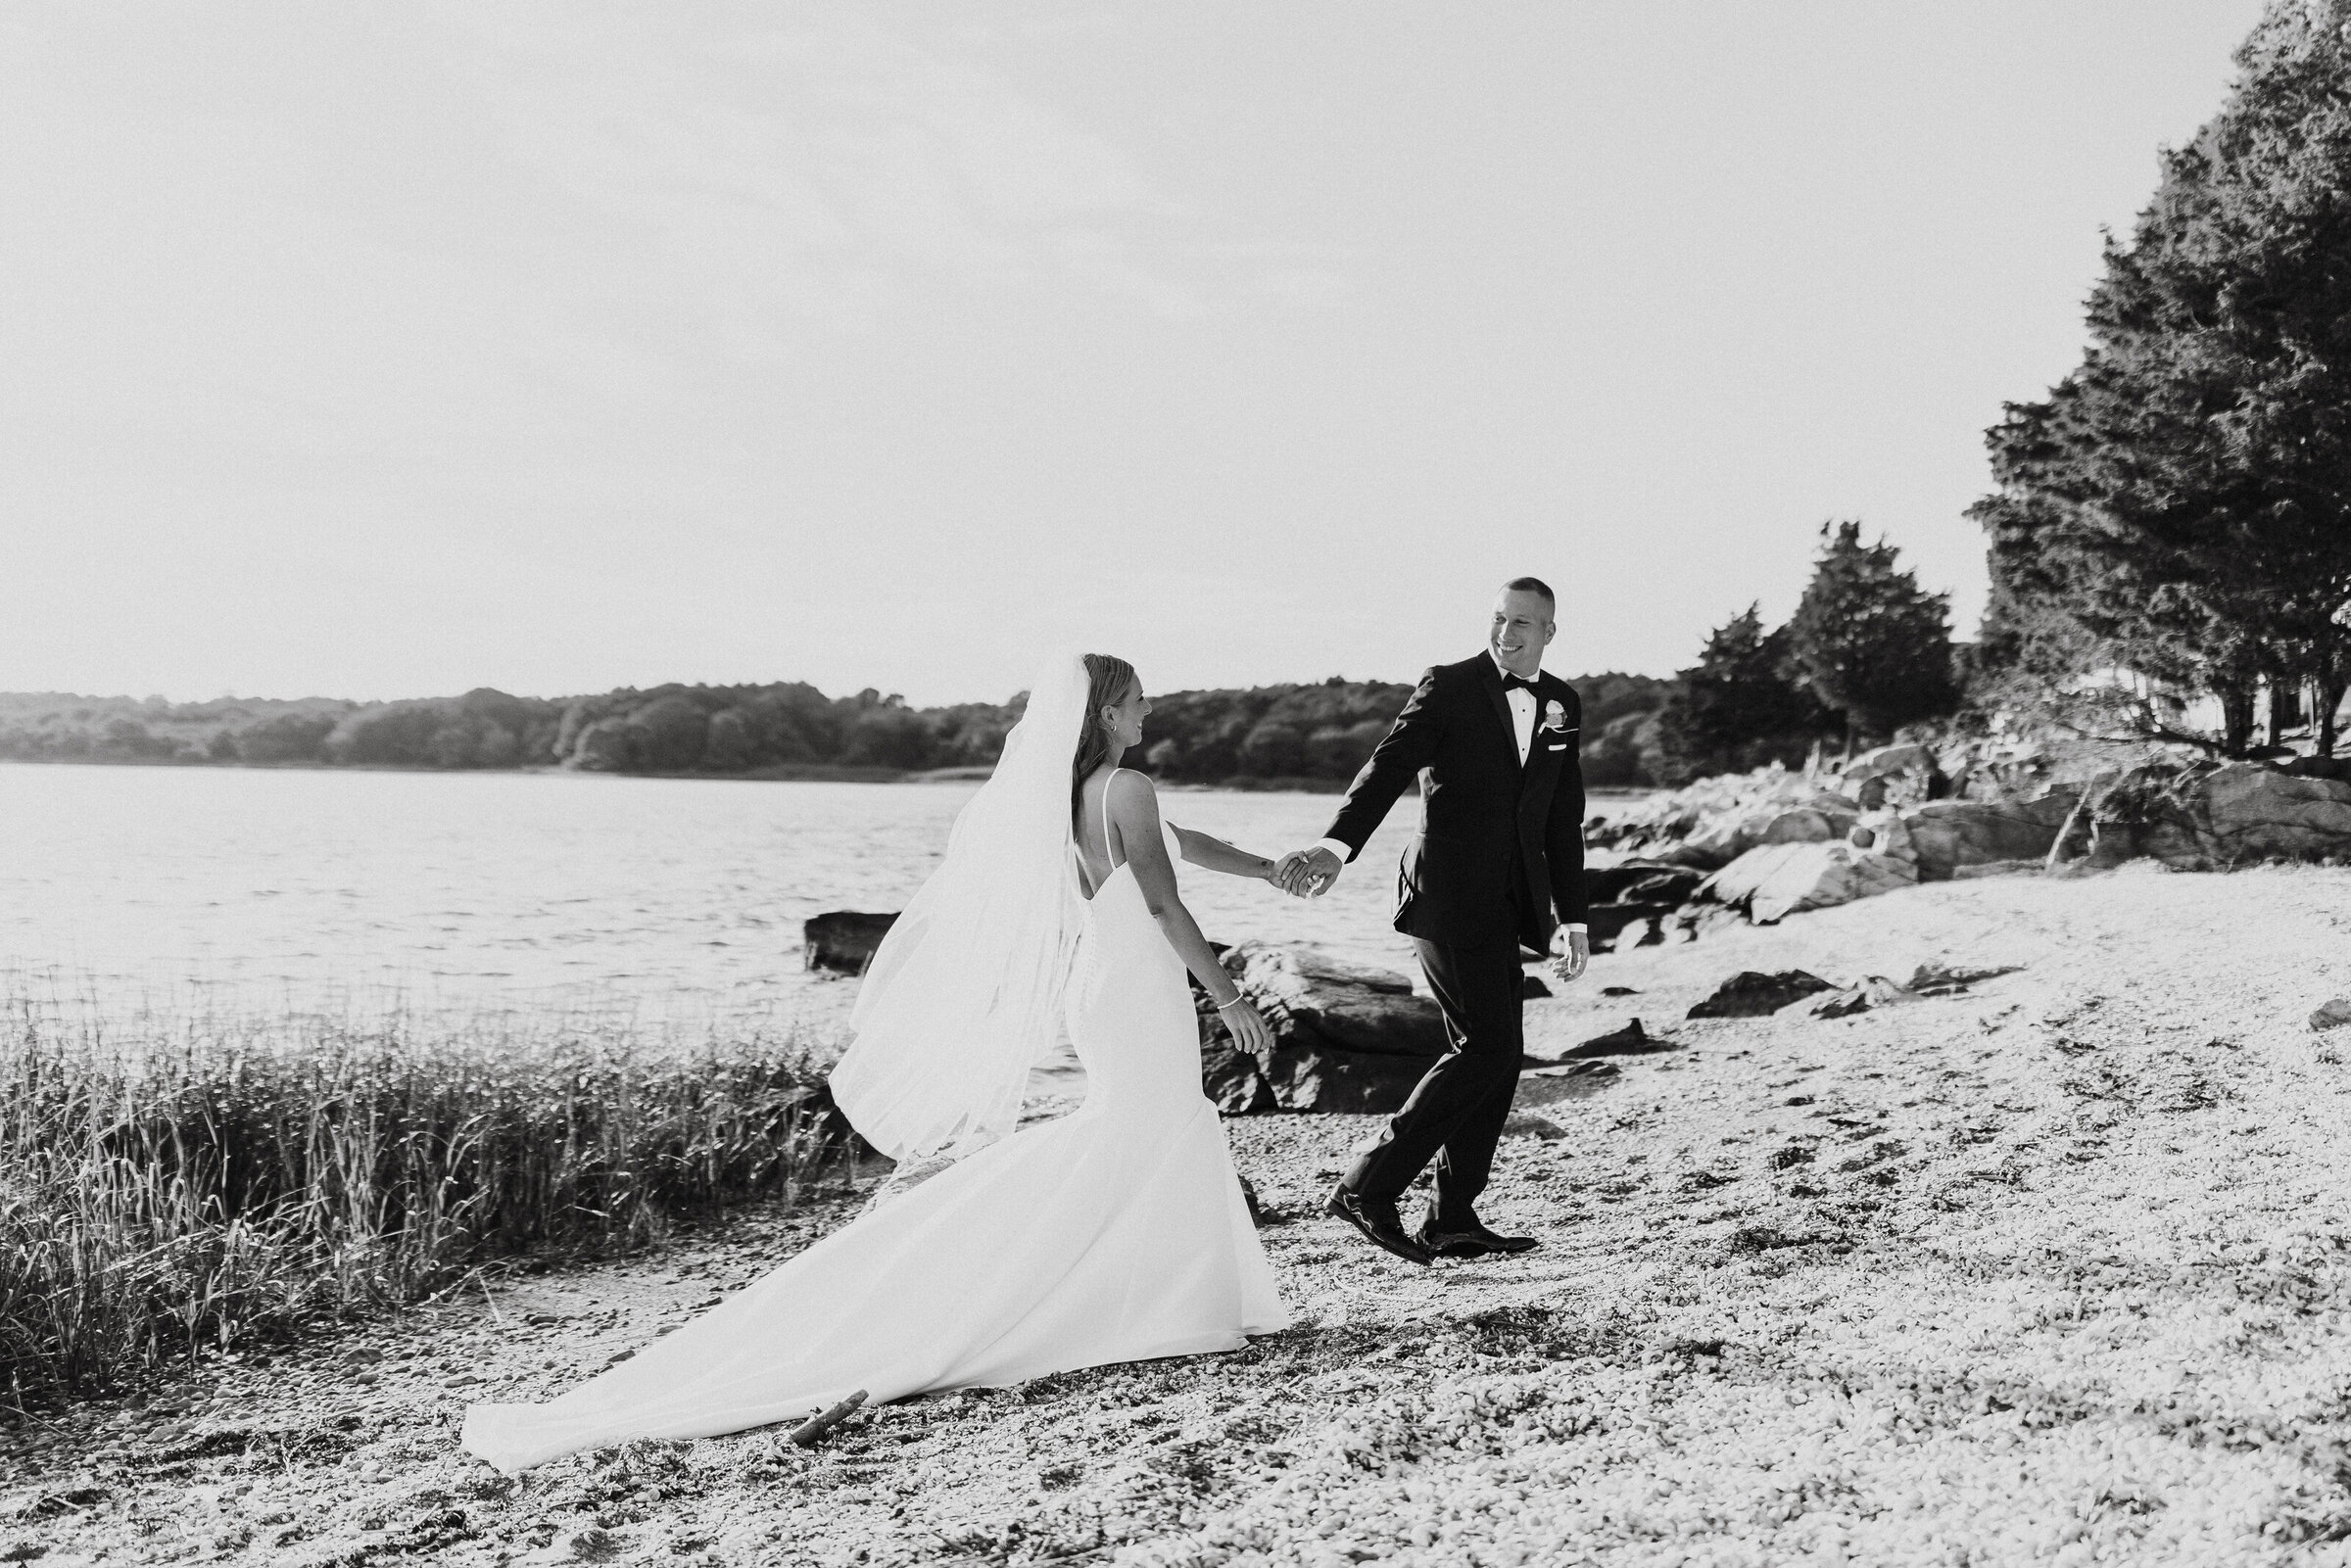 Bride and groom hold hands and walk along beach after wedding ceremony at Mount Hope Farm in Bristol, RI